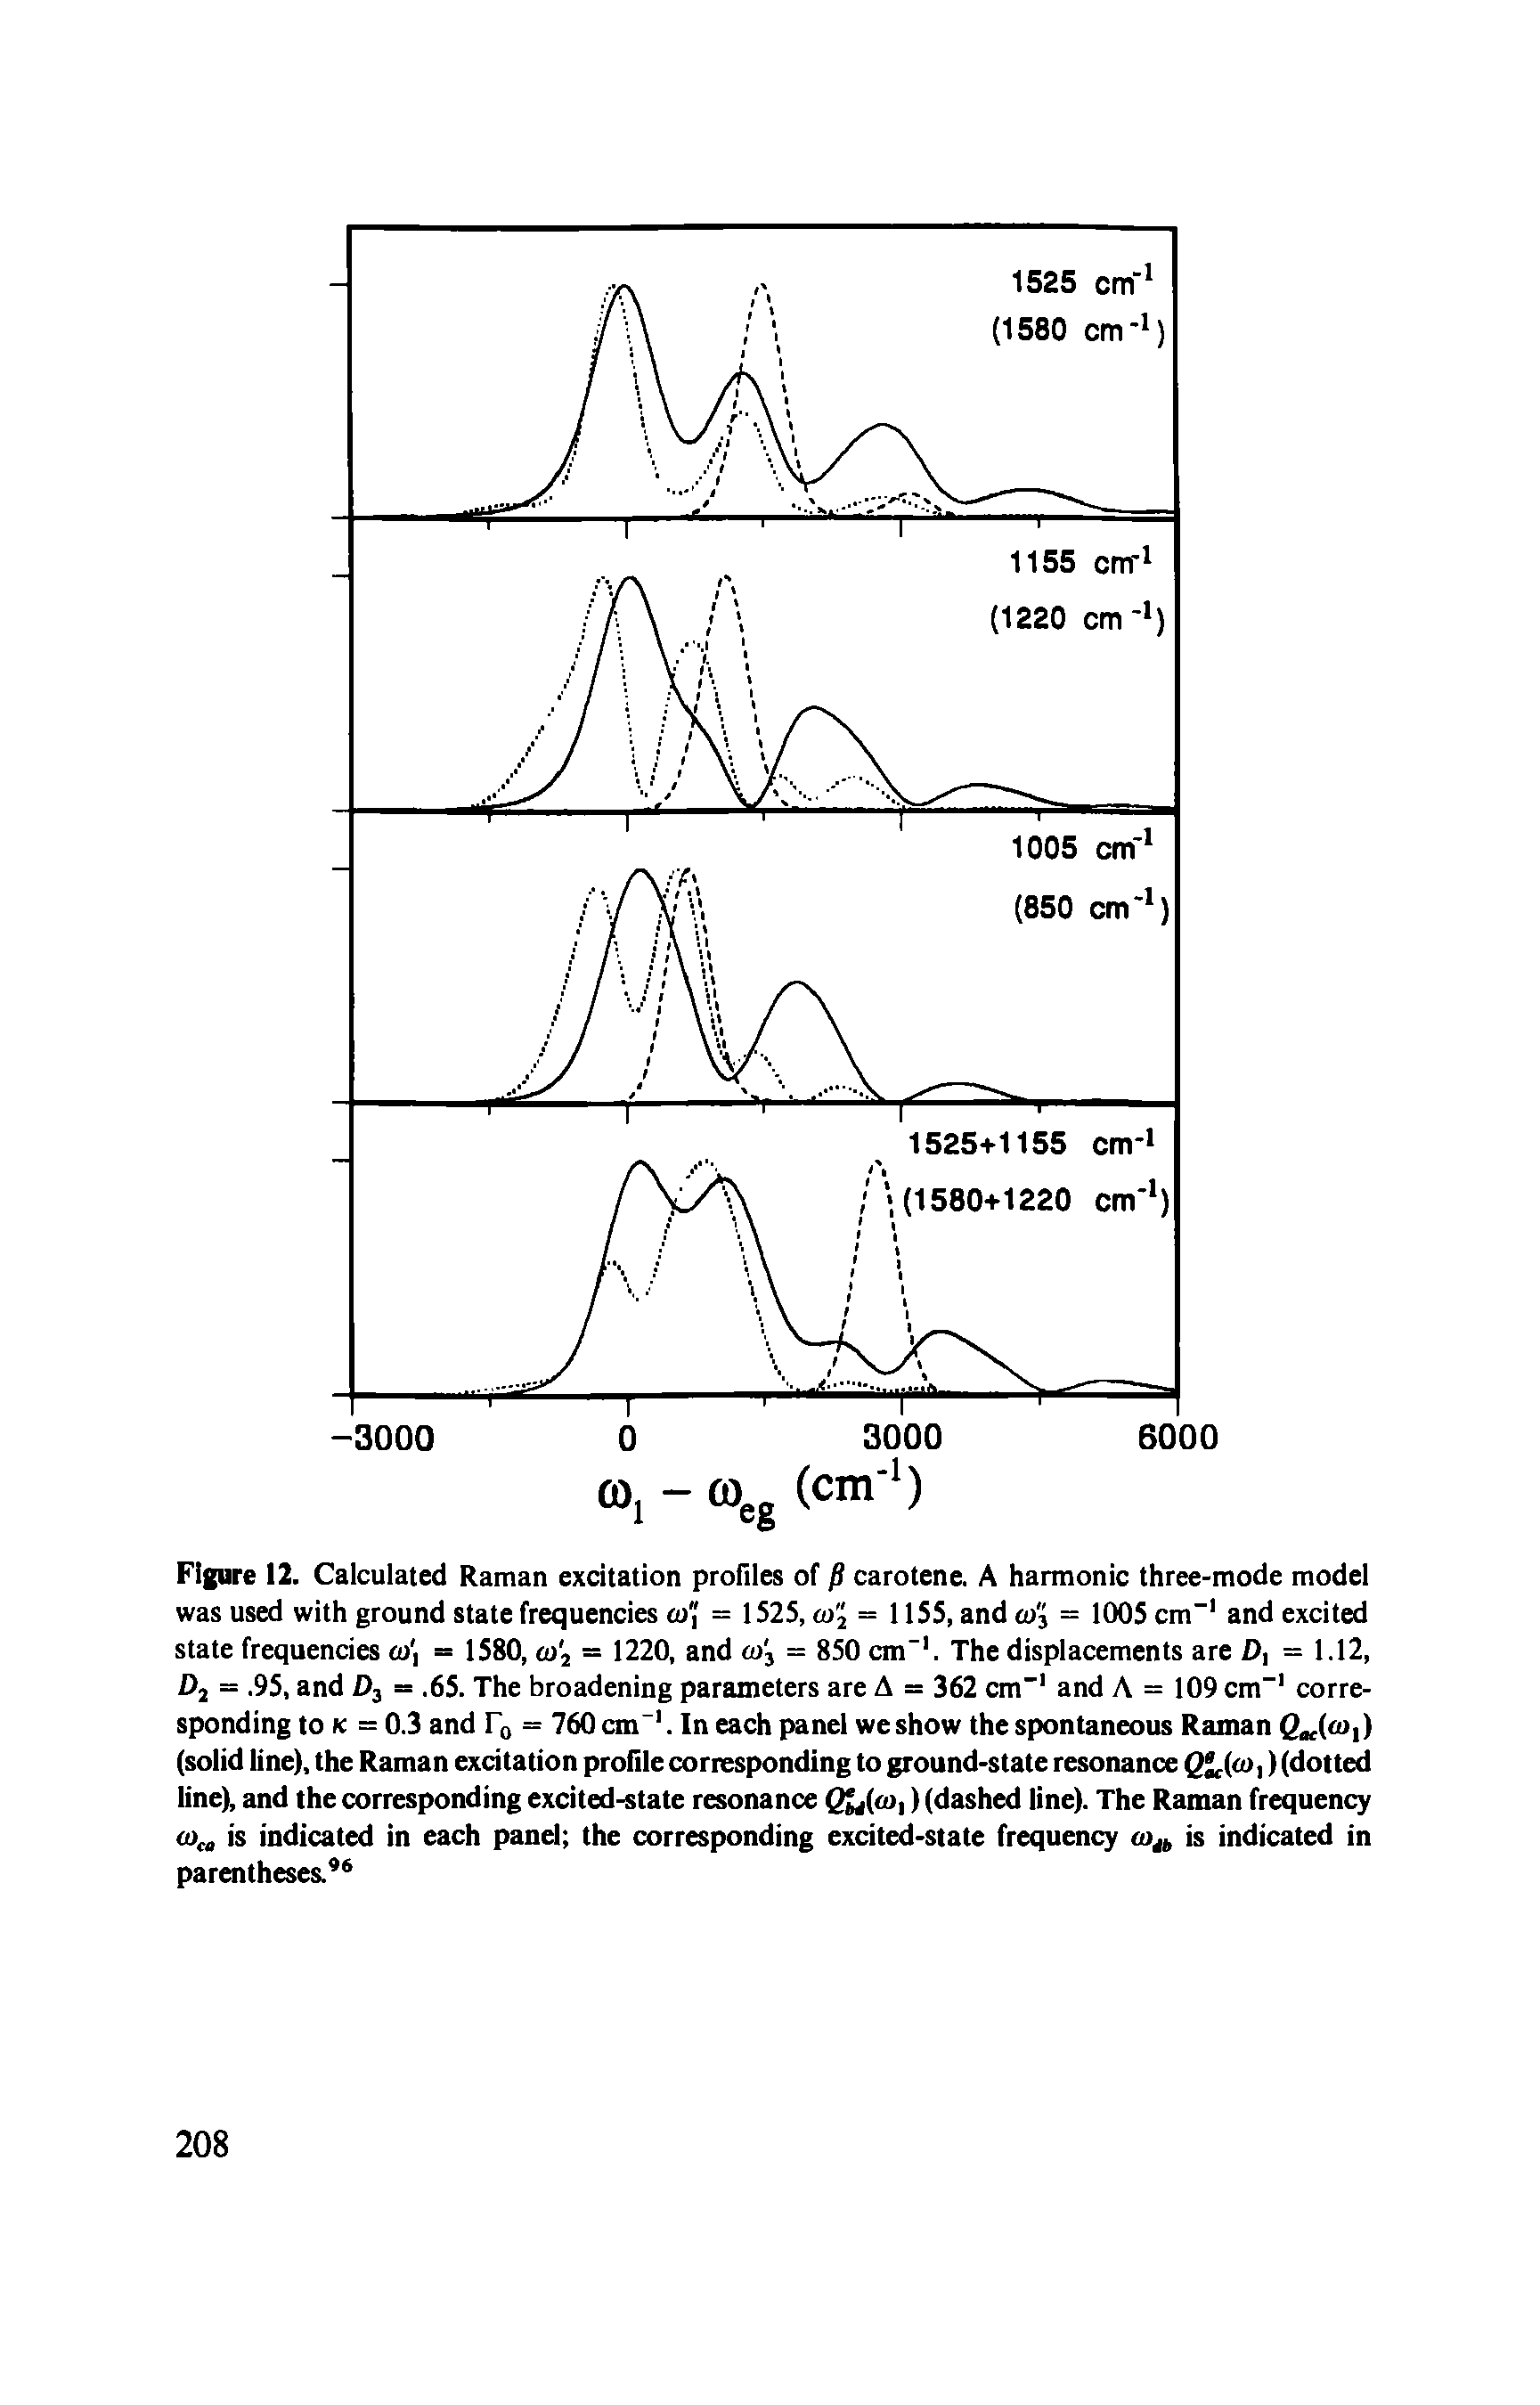 Figure 12. Calculated Raman excitation profiles of / carotene. A harmonic three-mode model was used with ground state frequencies a> , = 1525, co2 = 1155, and coj = 1005 cm-1 and excited state frequencies <o = 1580, co2 = 1220, and co 3 = 850 cm"1. The displacements are D, = 1.12, D2 =. 95, and D3 =. 65. The broadening parameters are A = 362 cm-1 and A = 109 cm-1 corresponding to k = 0.3 and r0 = 760 cm"1. In each panel we show the spontaneous Raman Q (ro,) (solid line), the Raman excitation profile corresponding to ground-state resonance ) (dotted...